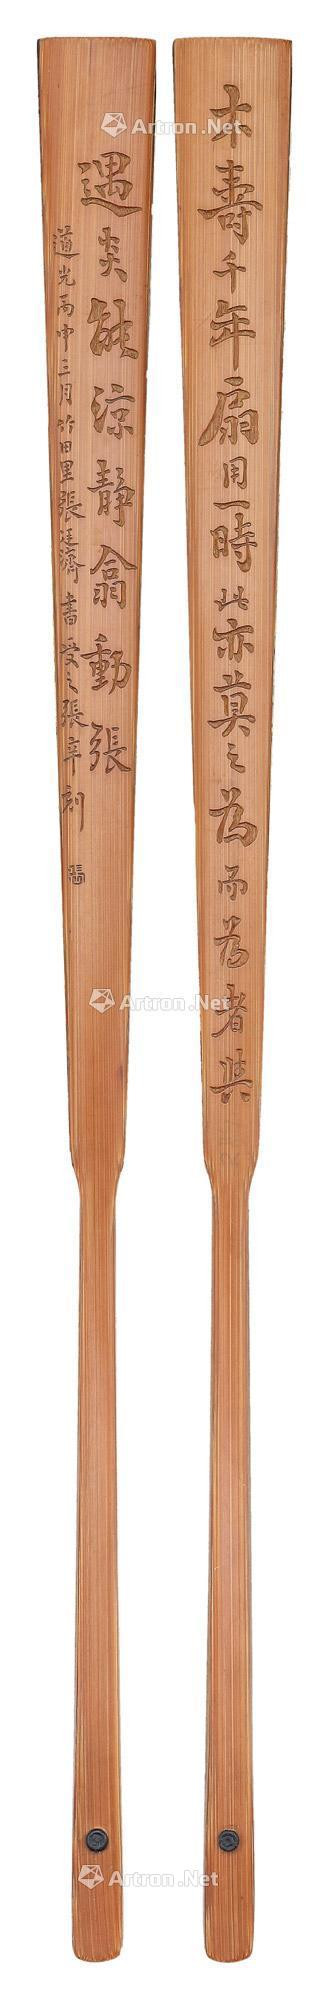 A BAMBOO FAN RIB CARVED WITH ZHANG TINGJI’S CALLIGRAPHY IN RUNNING SCRIPT BY ZHANG XIN